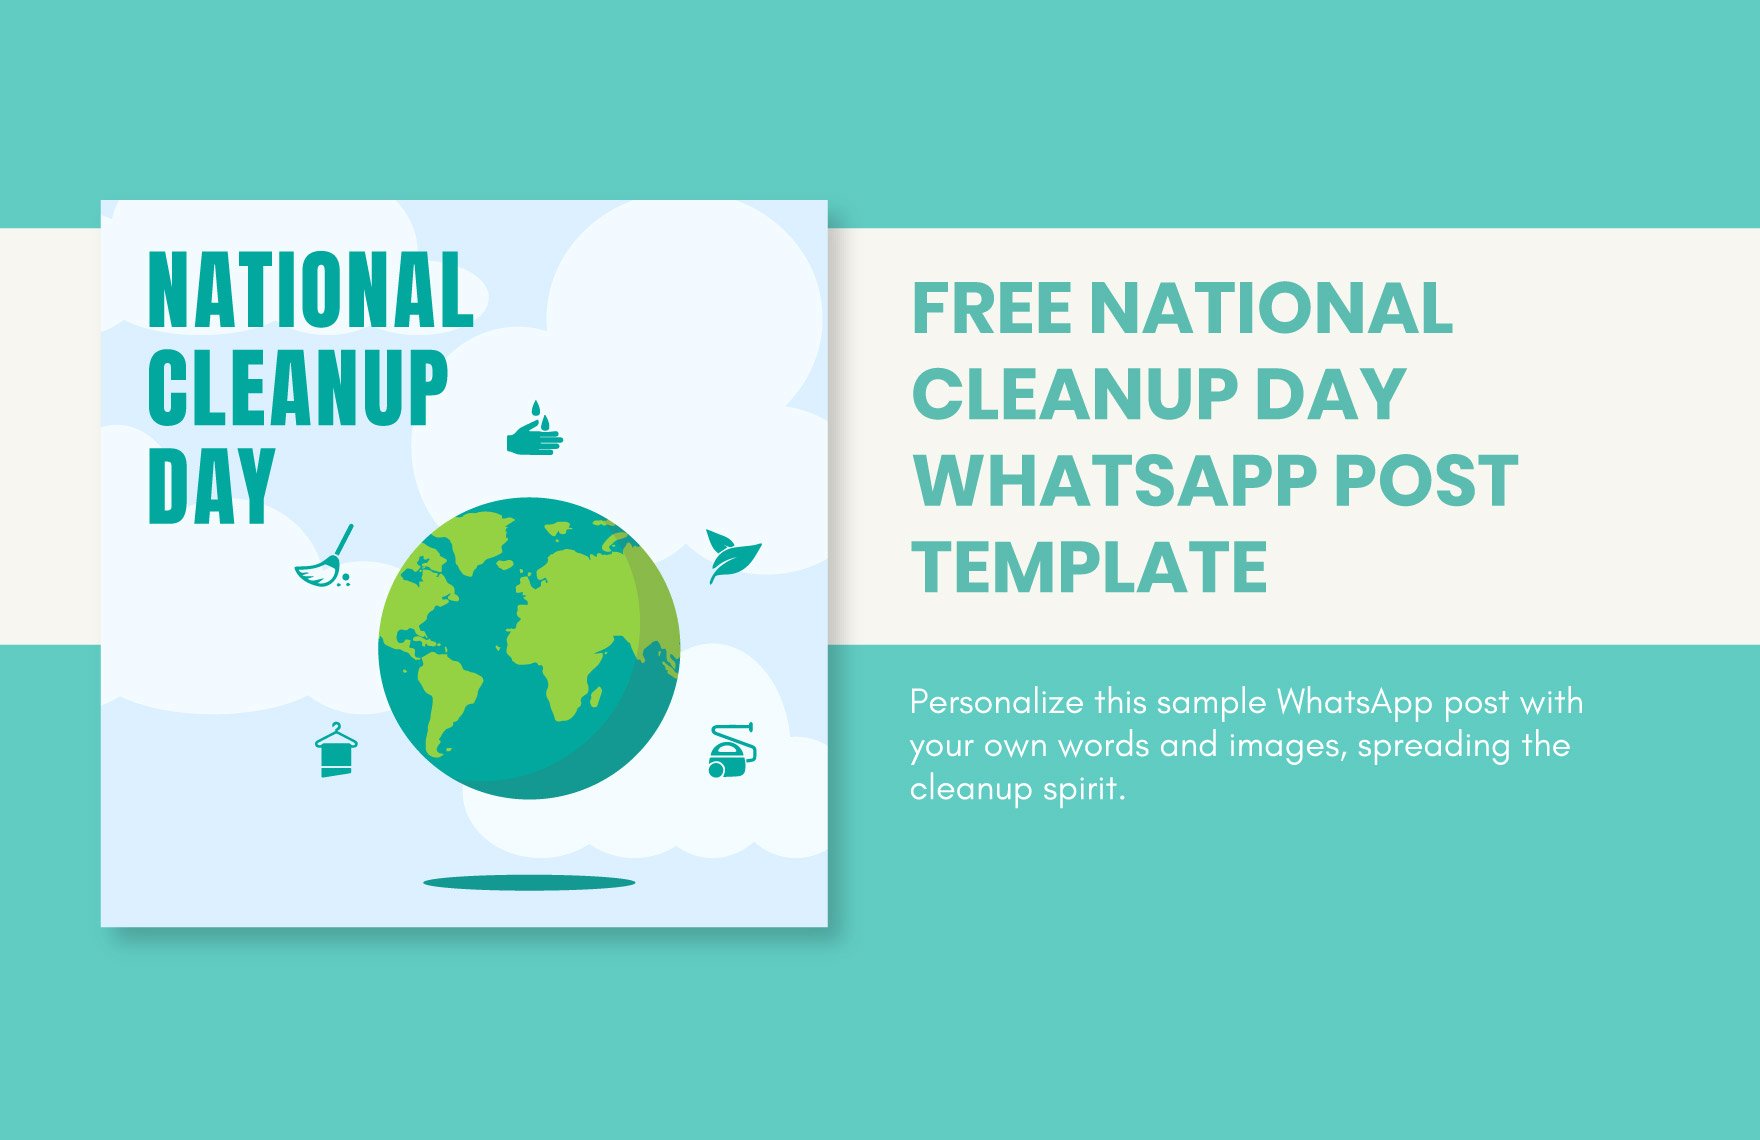 Free National CleanUp Day WhatsApp Post Template in Illustrator, PSD, PNG